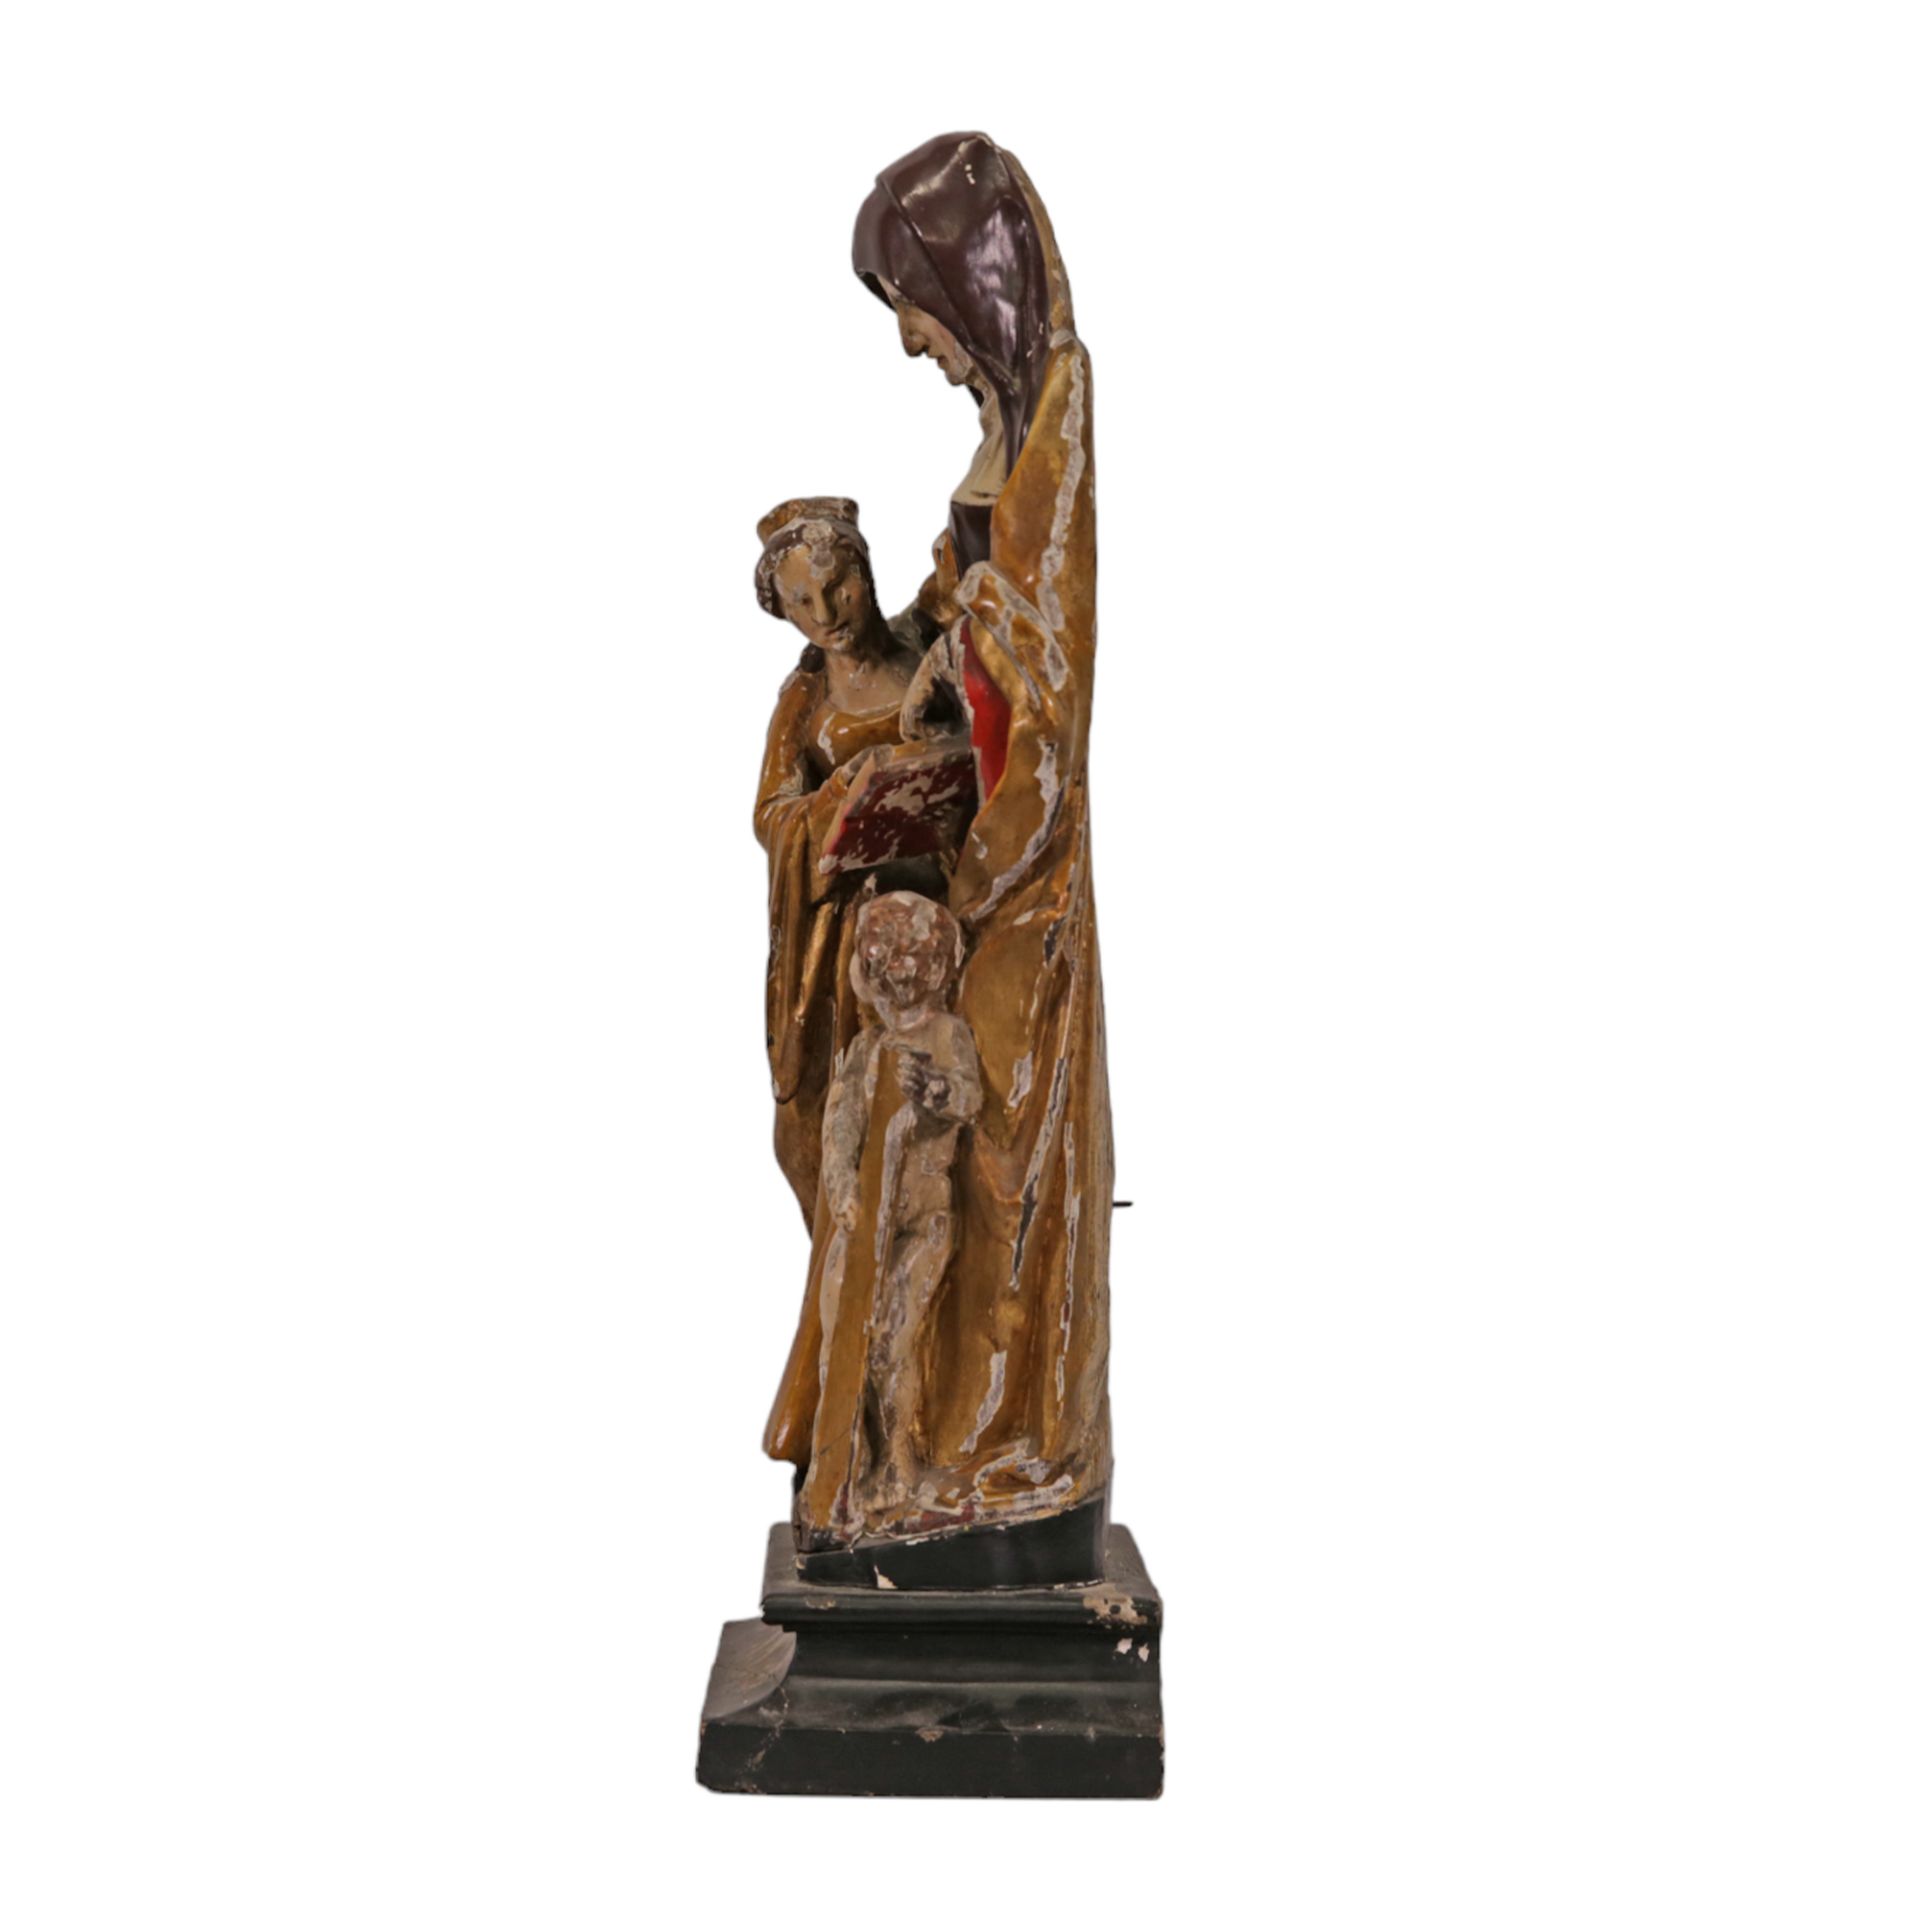 RARE, ANTIQUE, POLYCHROME WOODEN SCULPTURE "SAINT ANNE TRINITI", ON THE BASIS. FRANCE 19th CENTURY. - Image 5 of 13